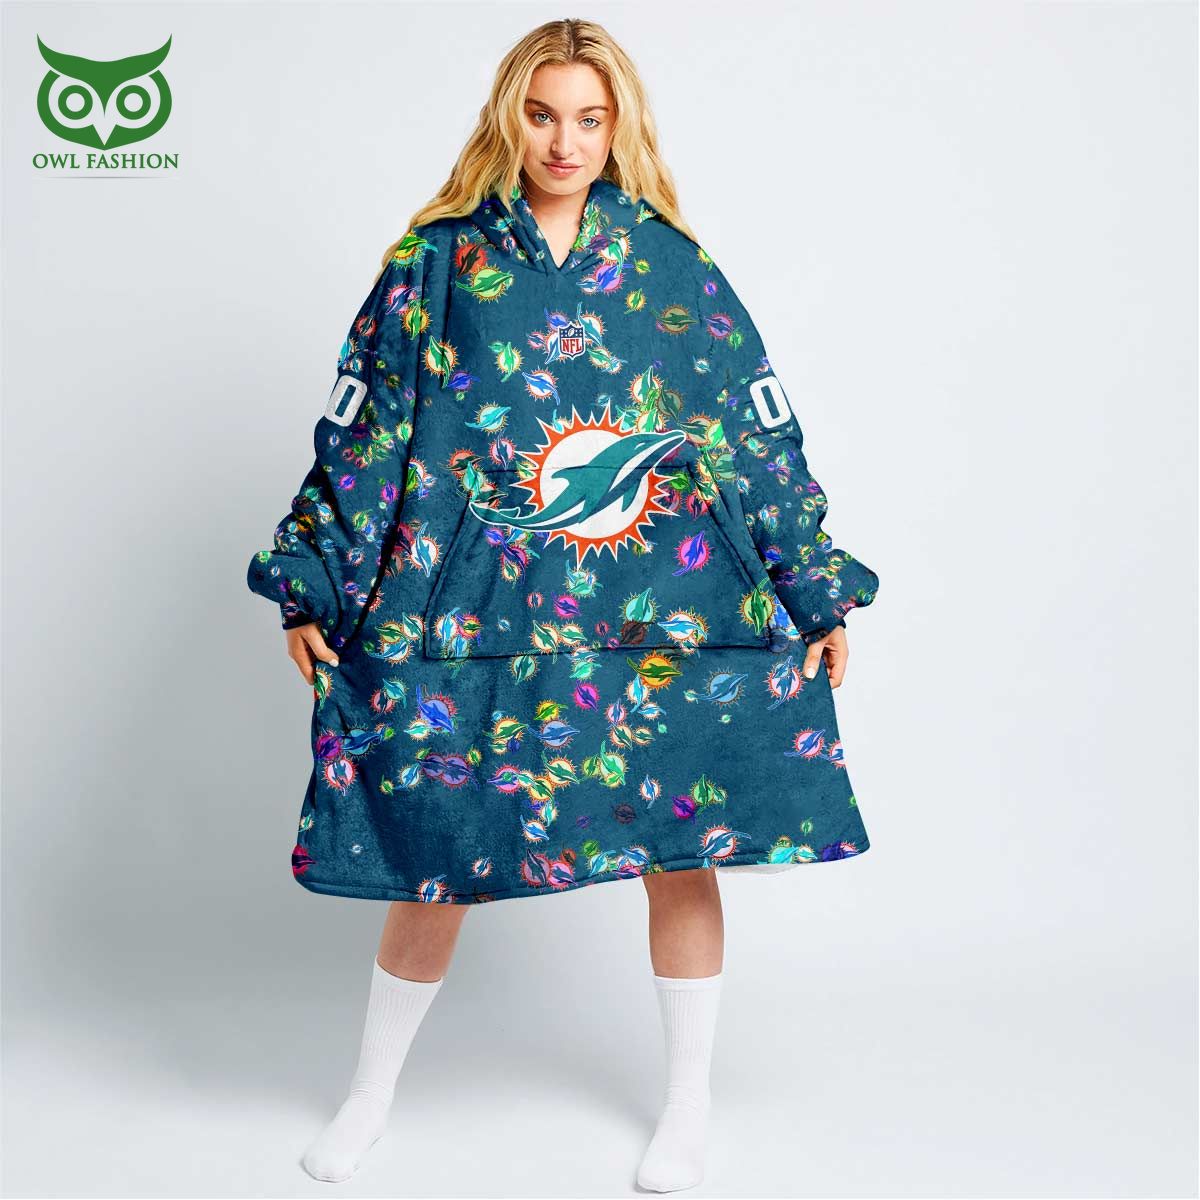 miami dolphins nfl champion personalized snuggie hoodie 1 DeGGY